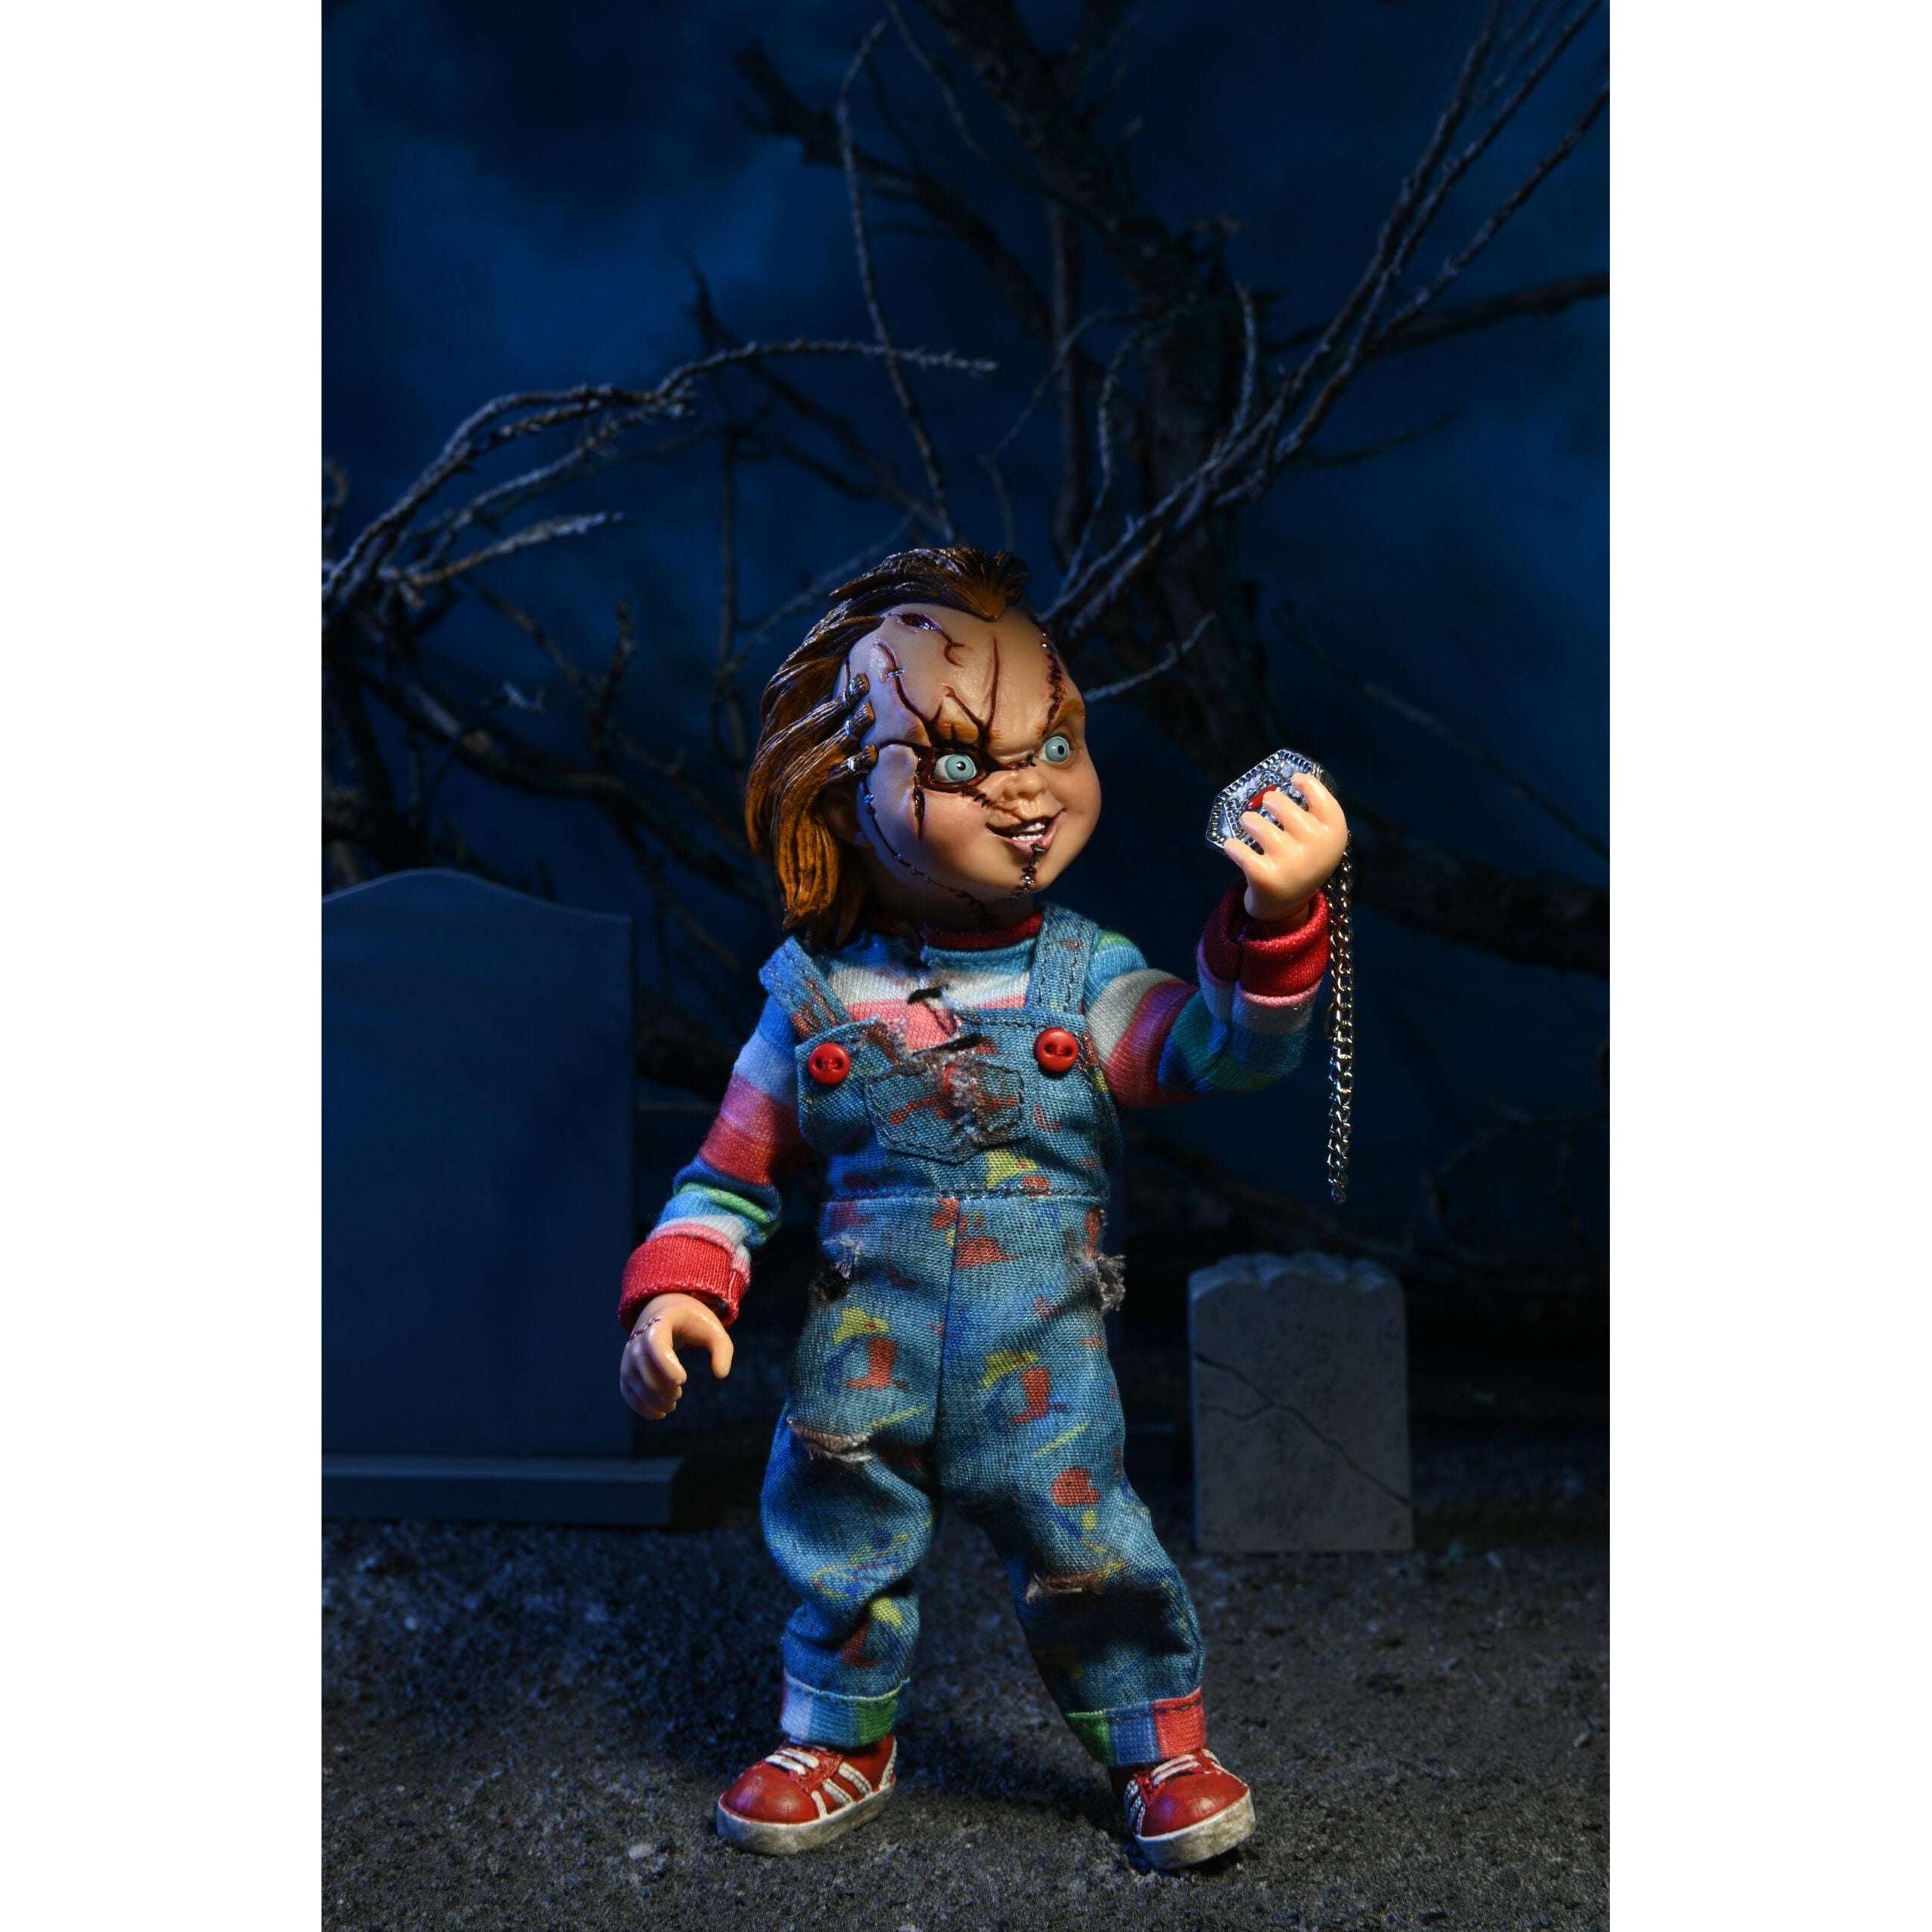 Bride of Chucky: 8″ Scale Chucky & Tiffany Collectible Clothed Figure 2 Pack